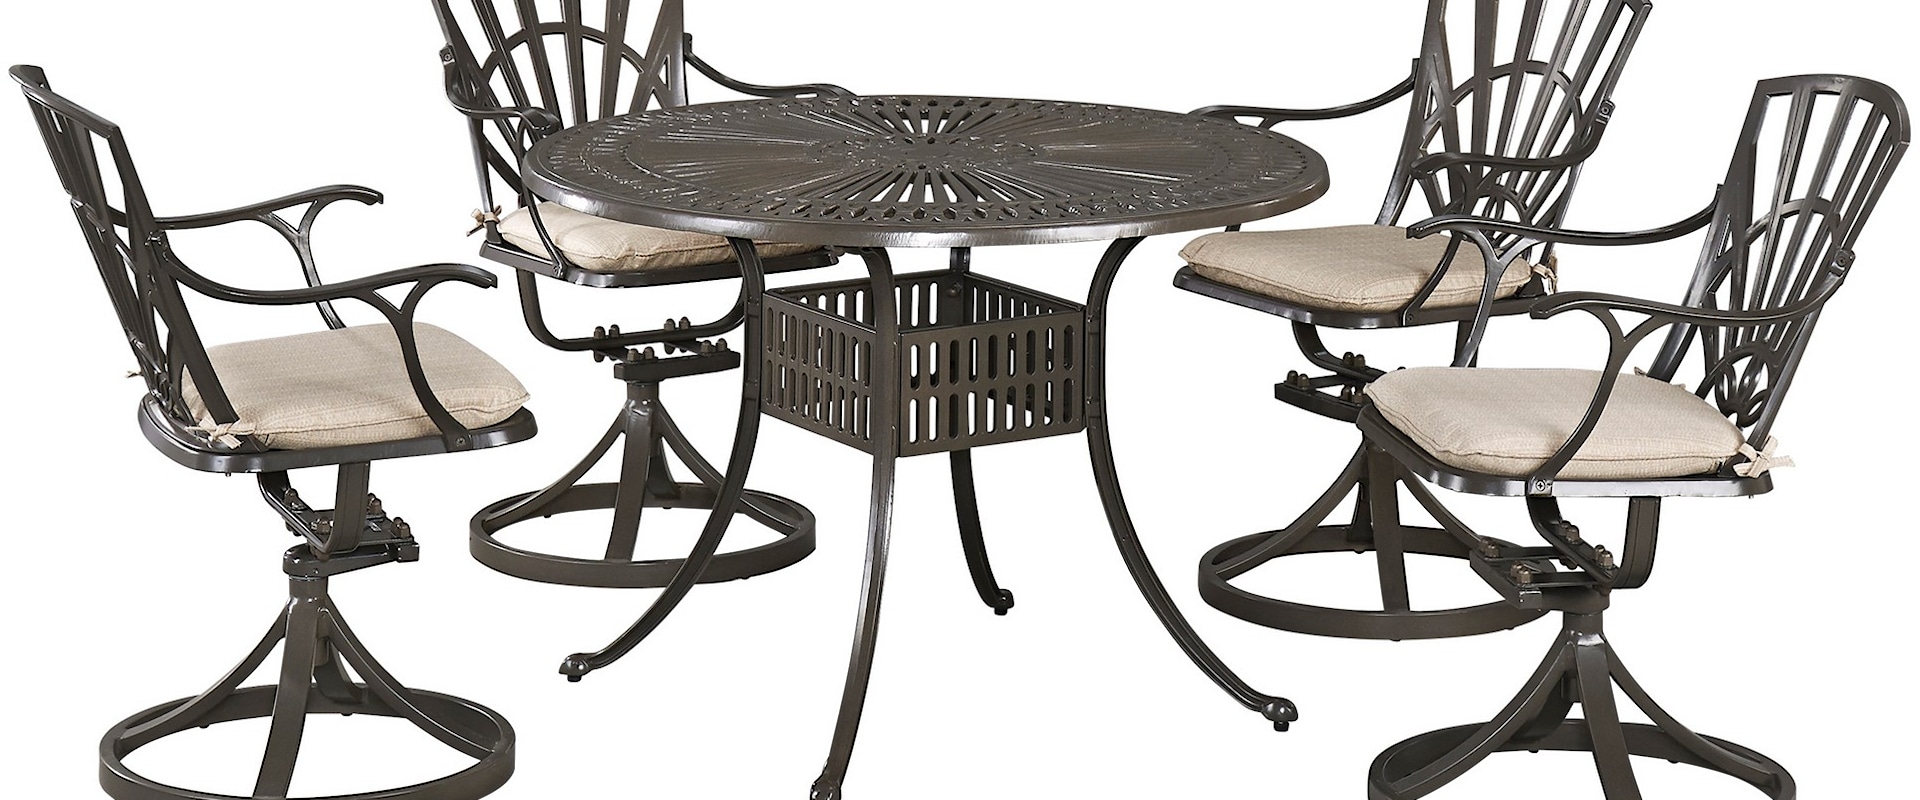 Traditional 5-Piece Outdoor Dining Set with Cushions